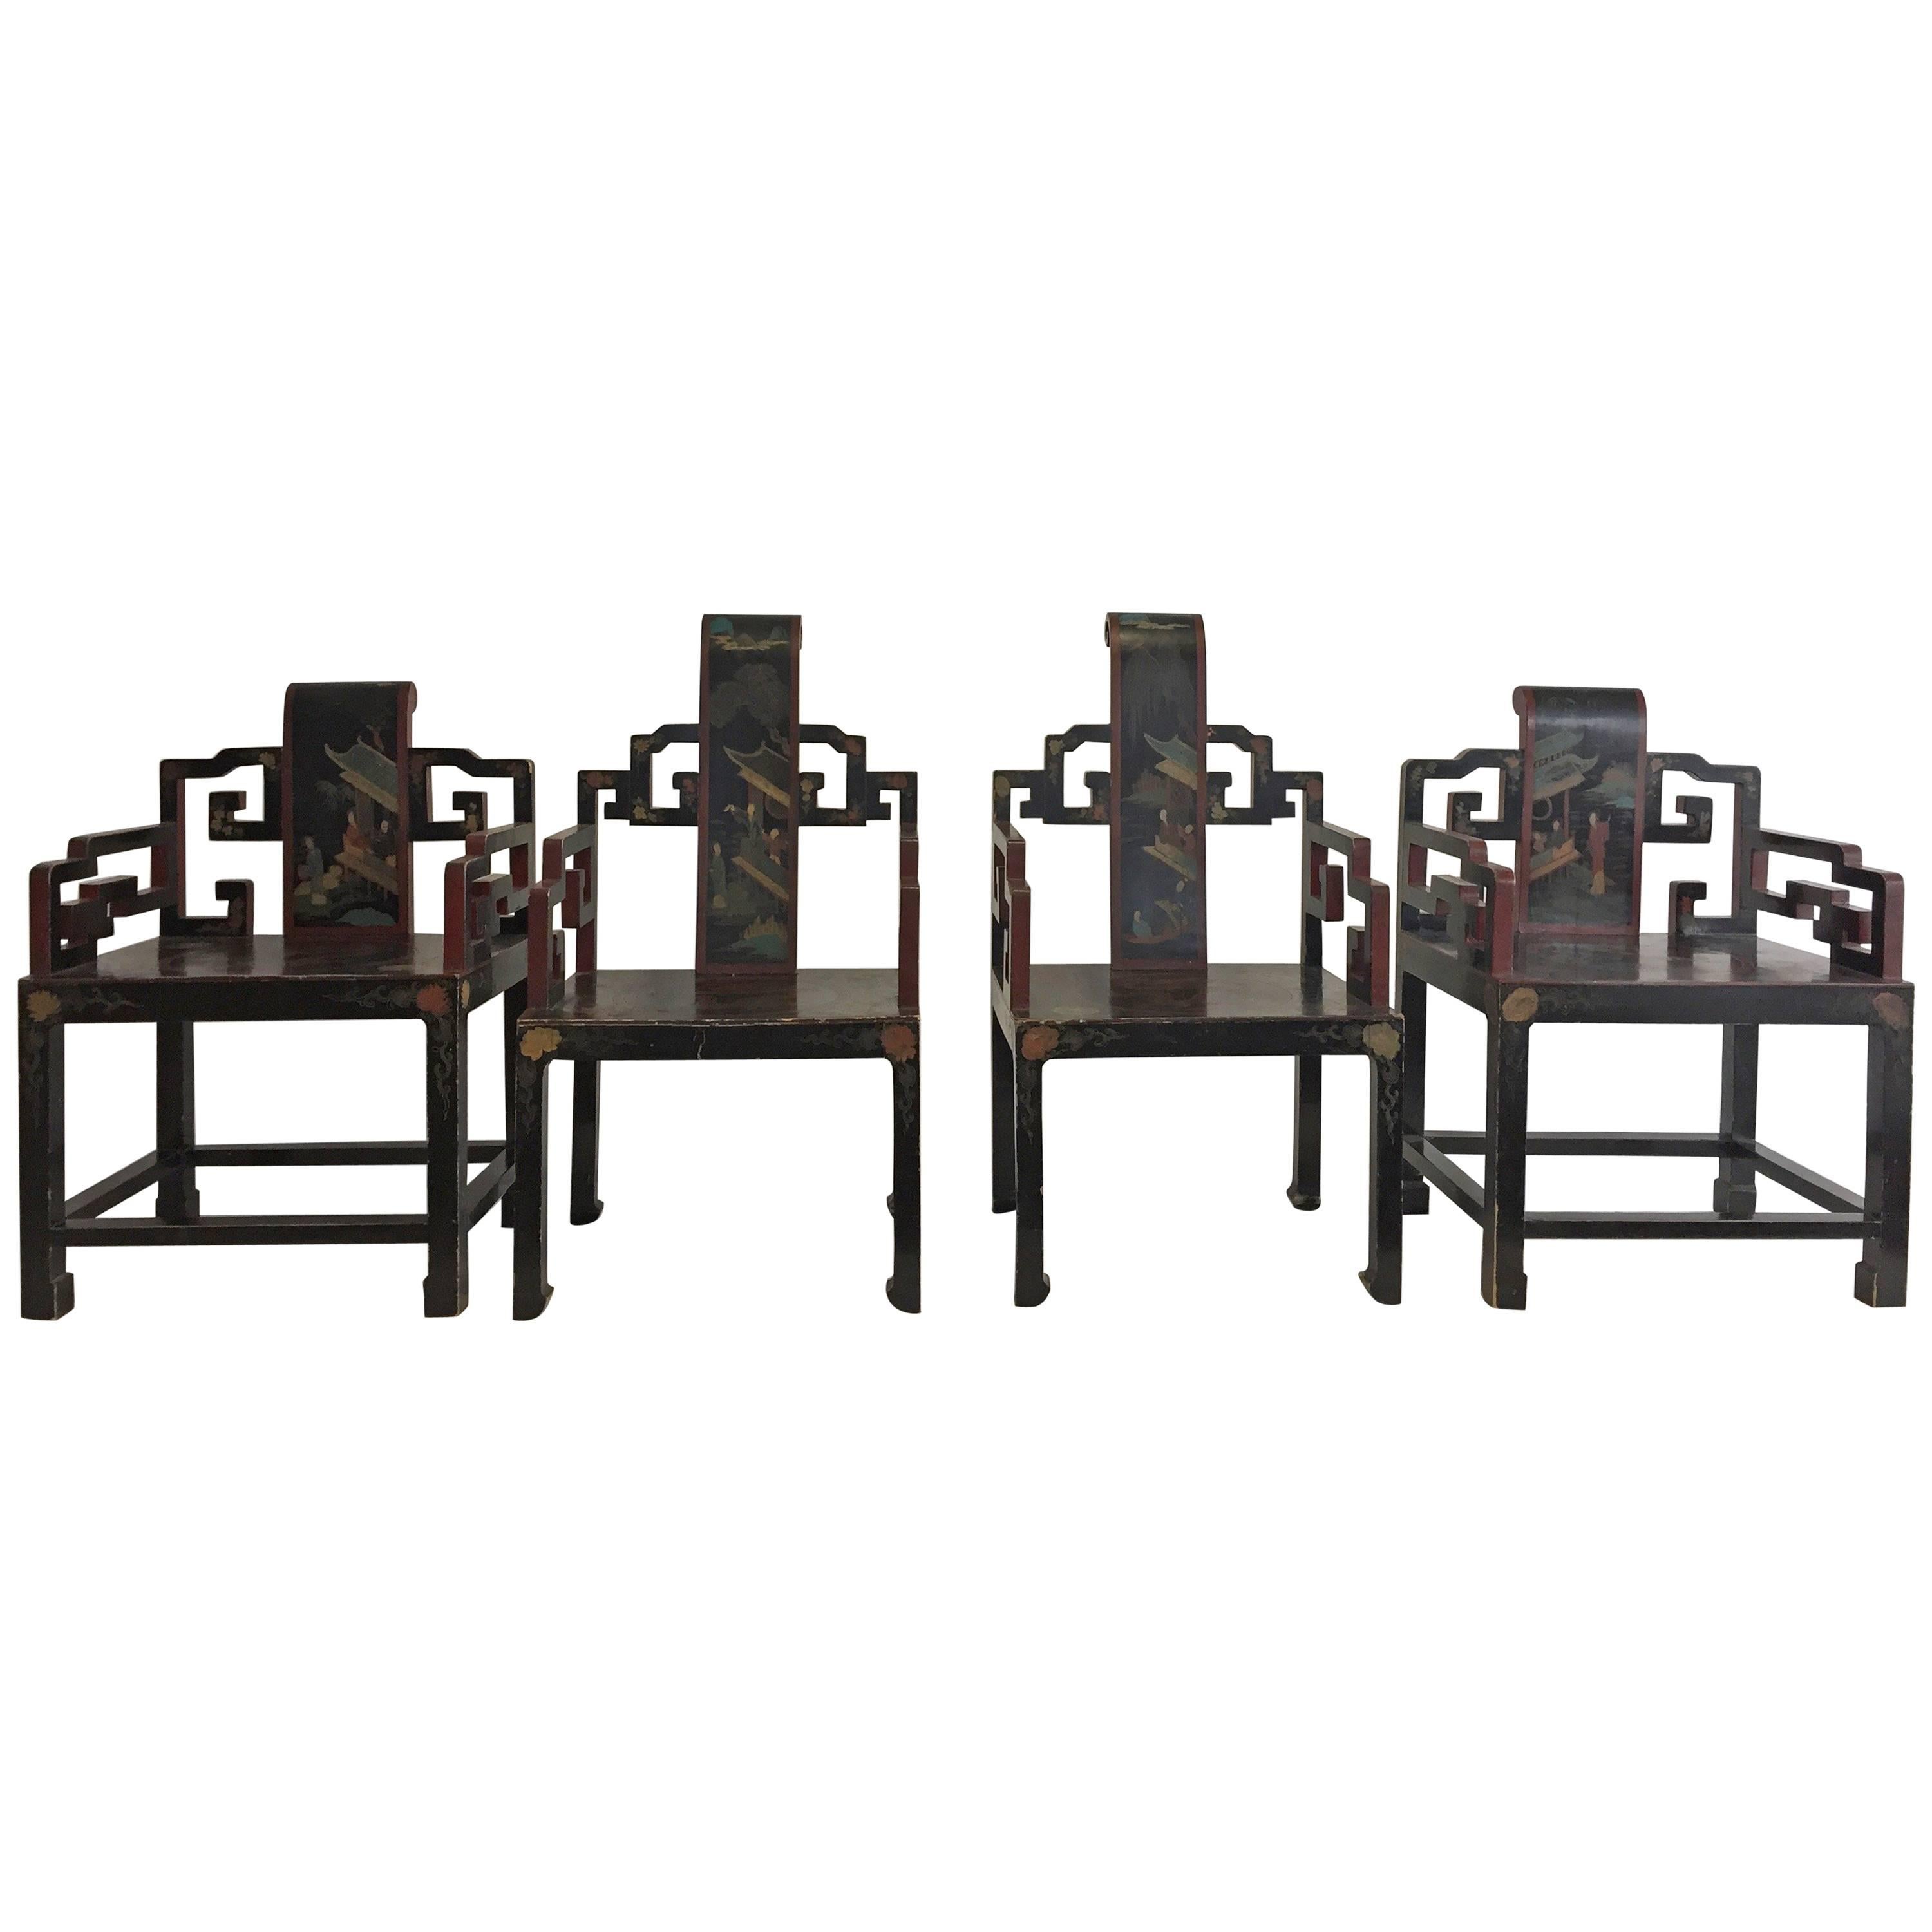 Chinese Art Deco Chairs Carved And Hand-Painted Set Of Four